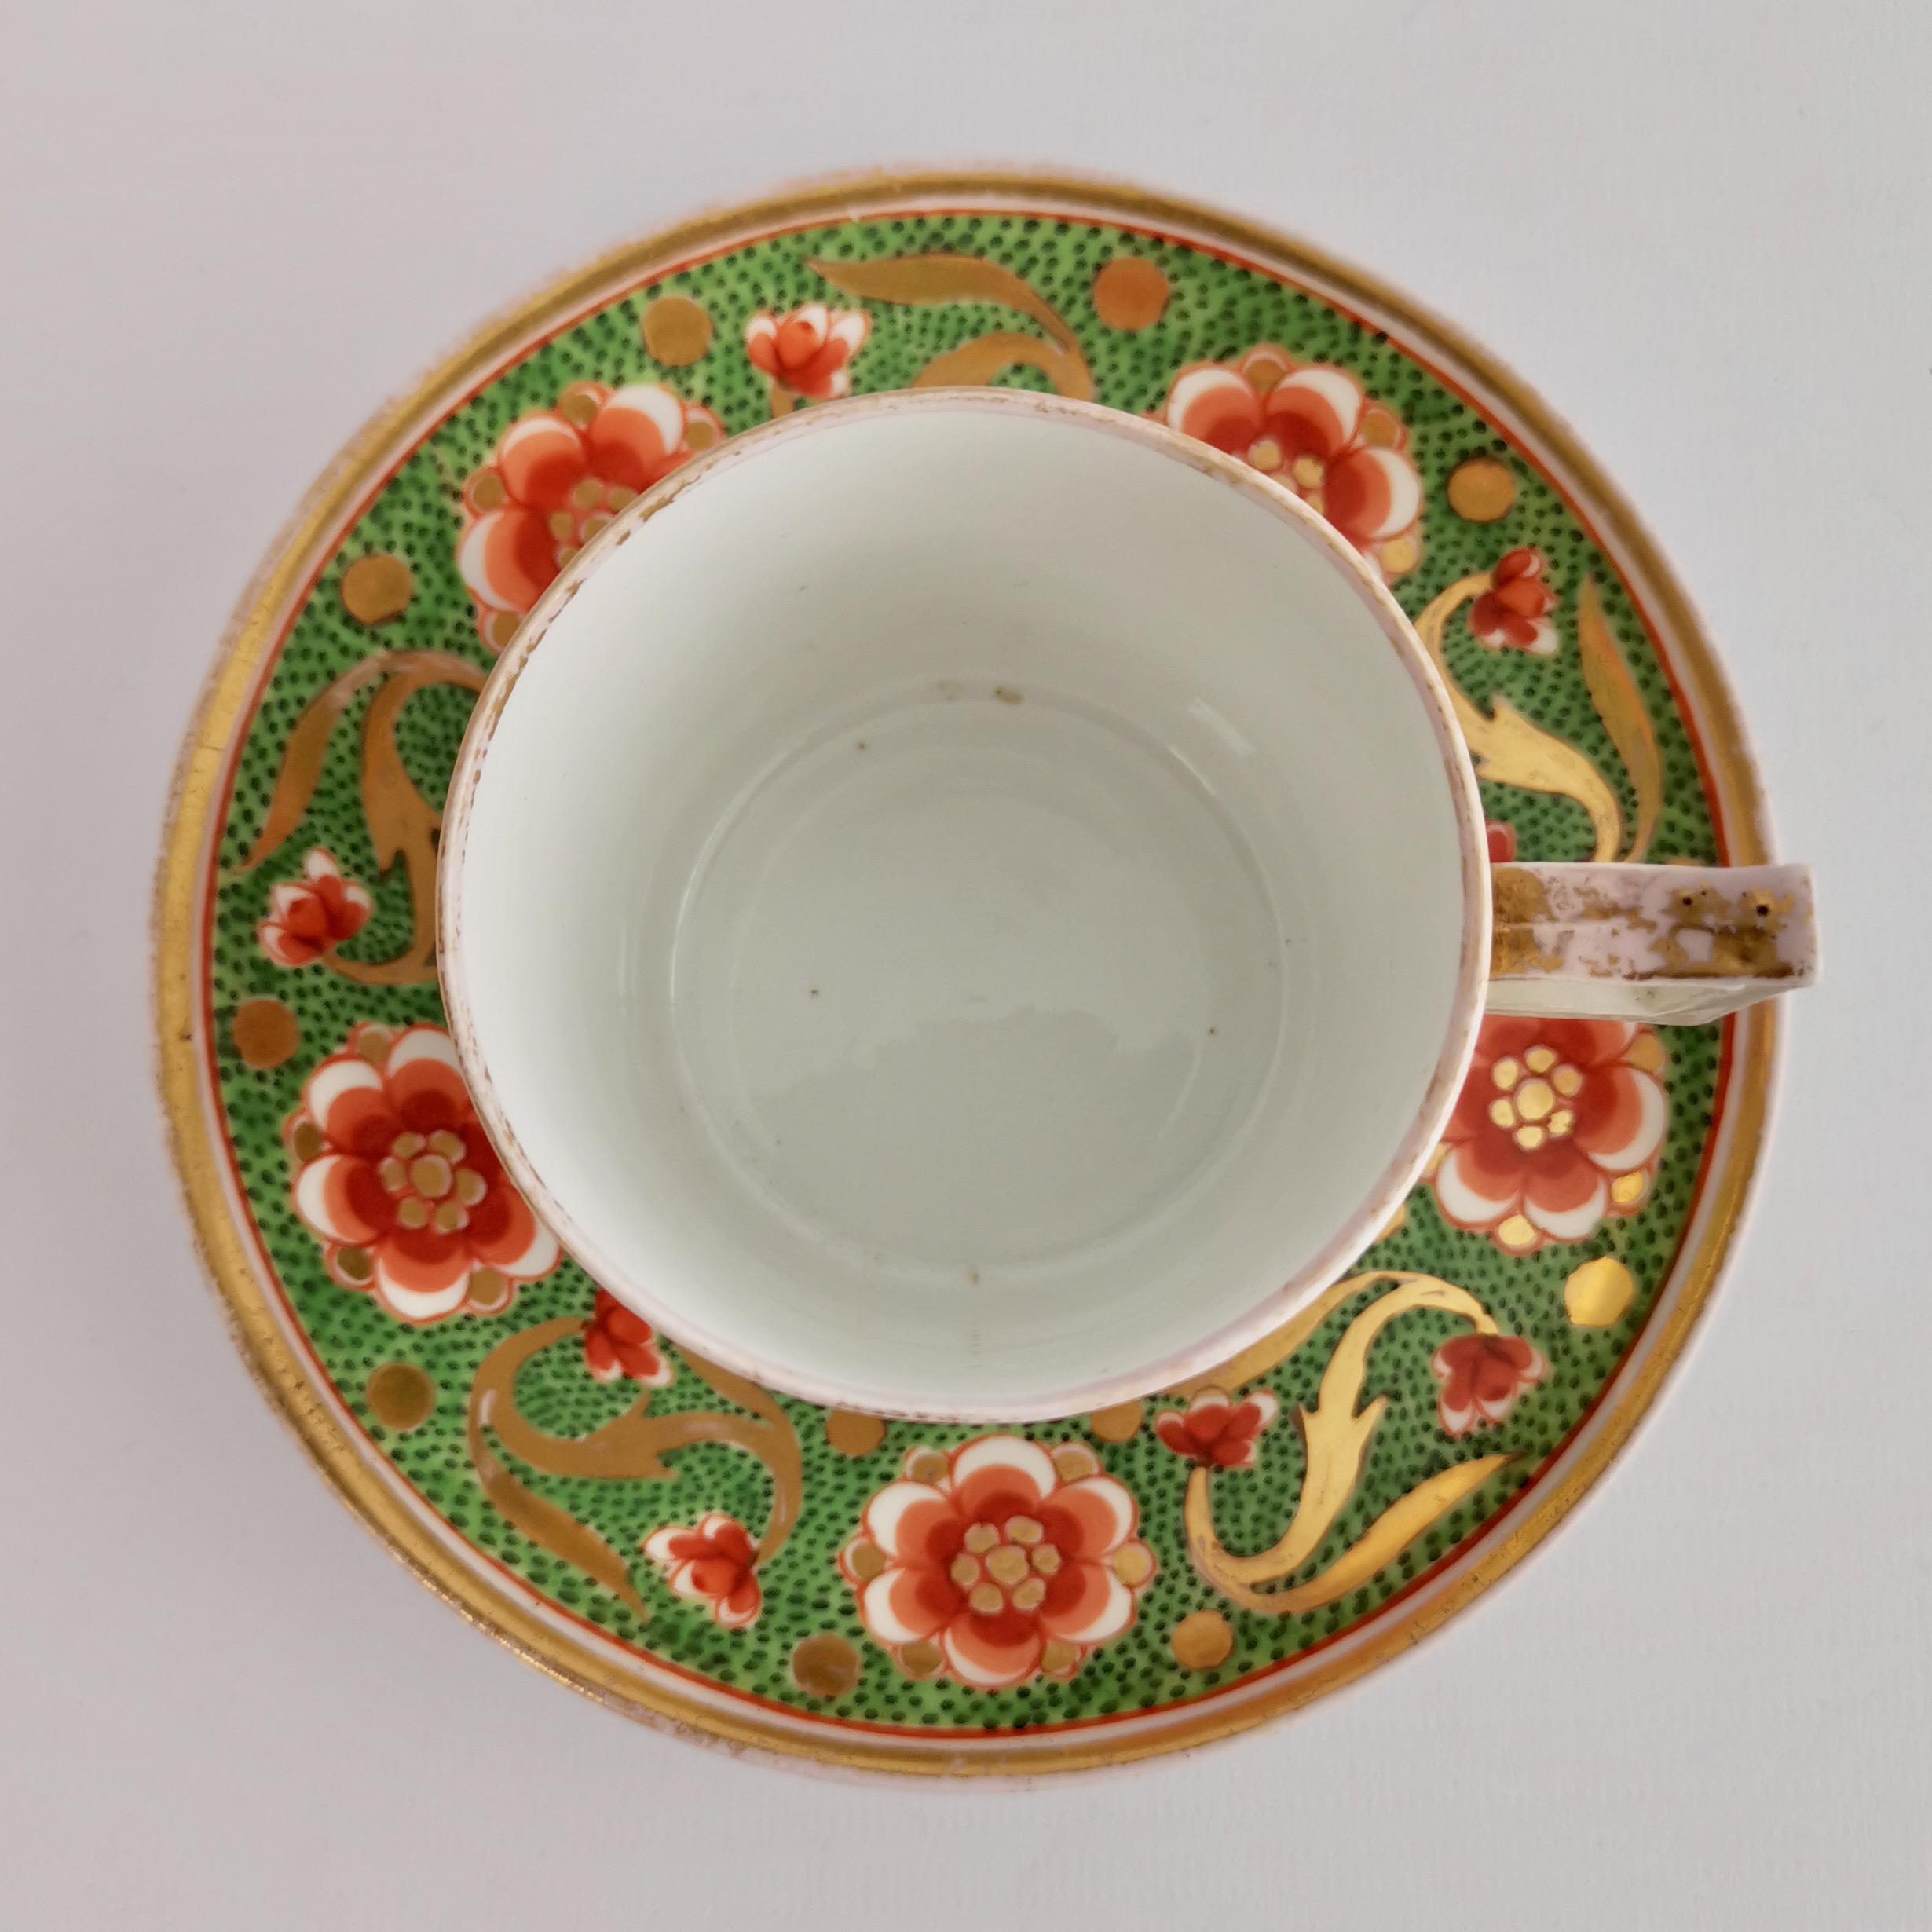 Derby Porcelain Teacup Trio, Green with Red Flowers, 1800-1810 In Good Condition For Sale In London, GB